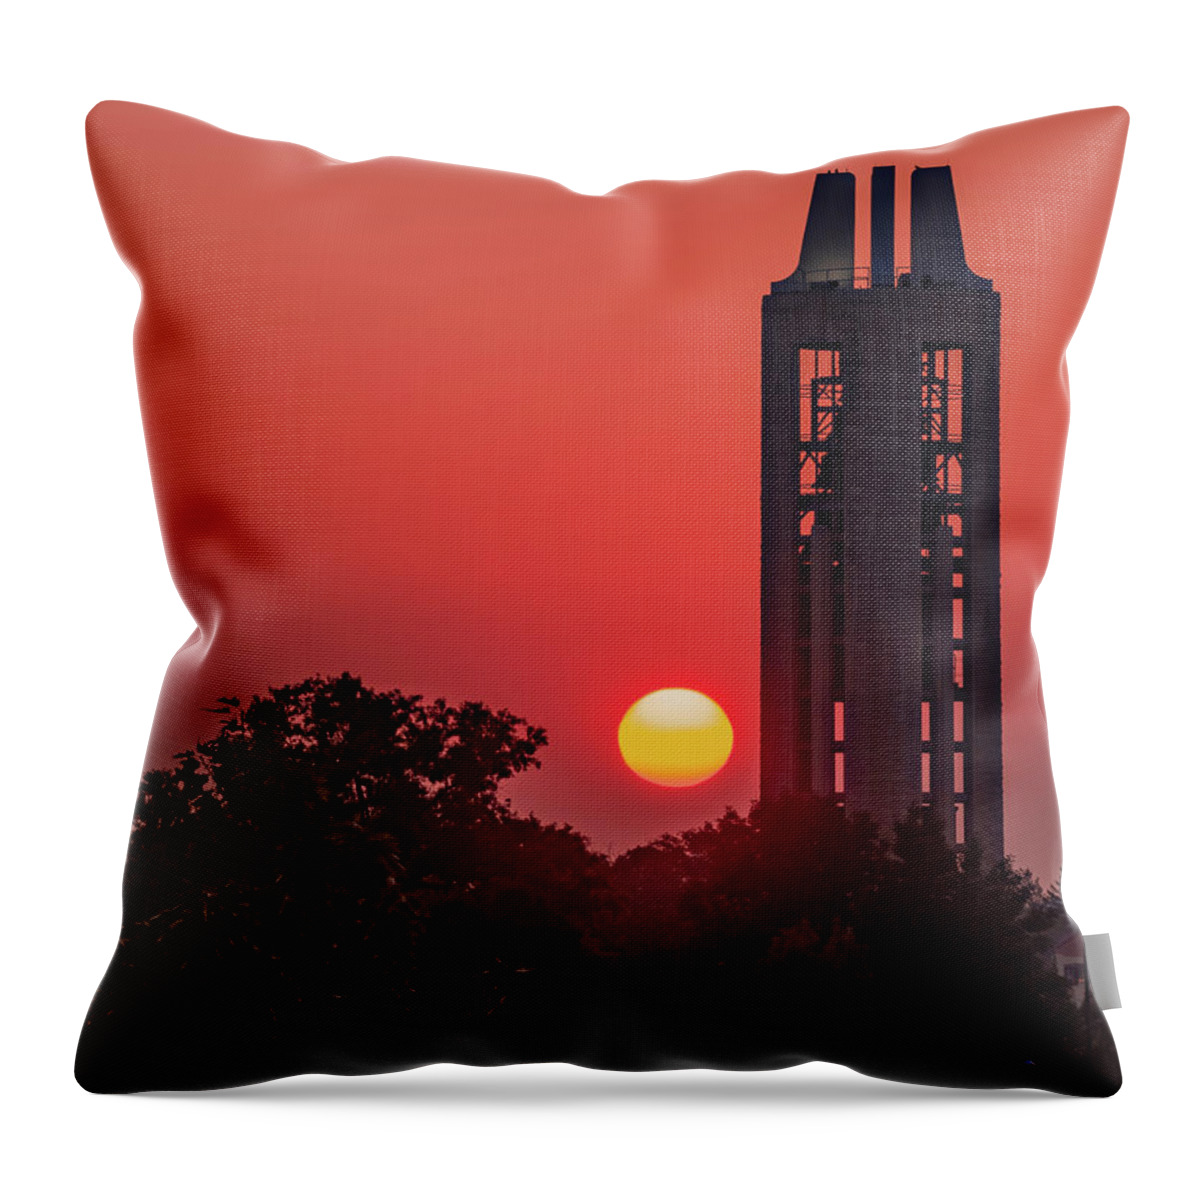 Lawrence Kansas Throw Pillow featuring the photograph Kaw Valley Sunrise At The Campanile Tower - Lawrence Kansas by Gregory Ballos